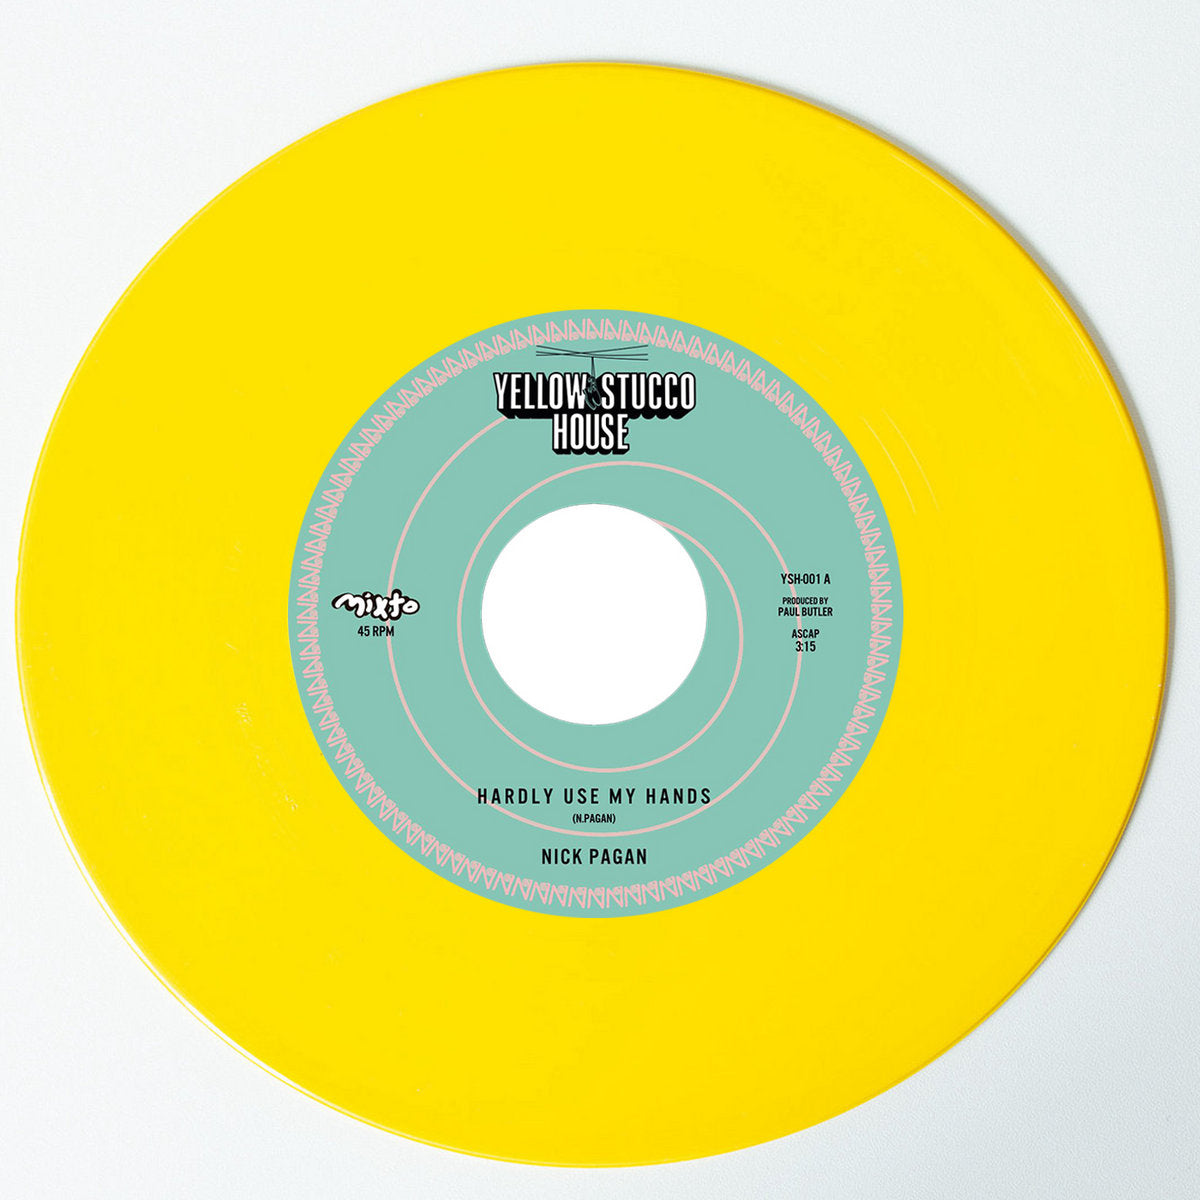 NICK PAGAN - HARDLY USE MY HANDS b/w IN A CAVE Vinyl 7"